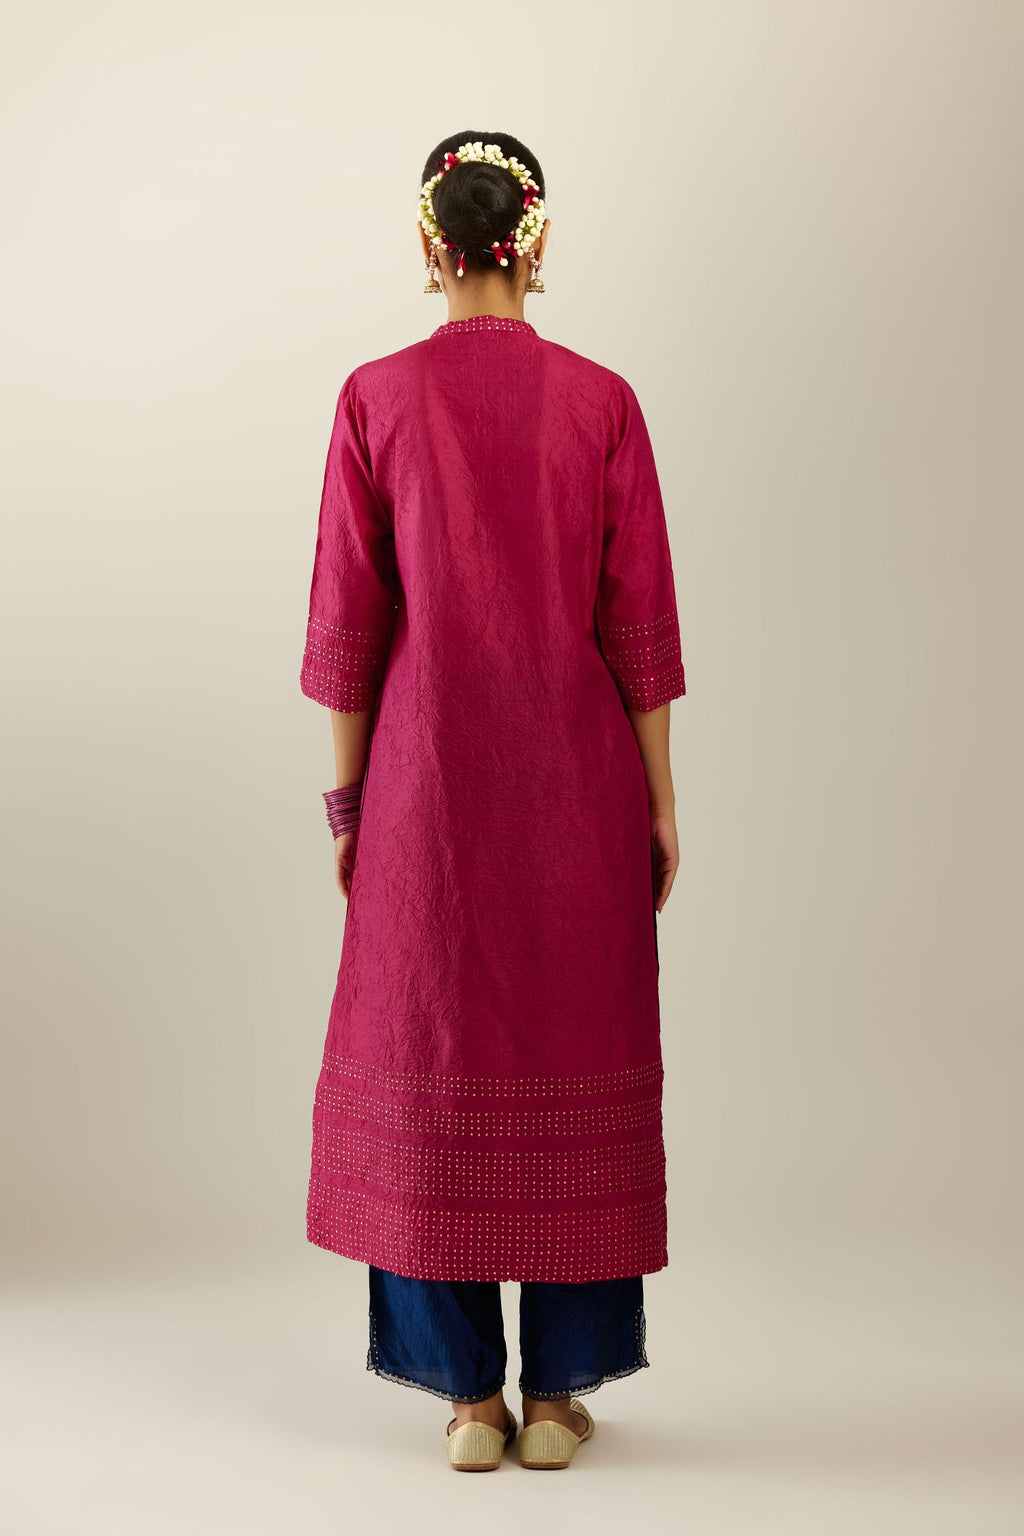 Jazzberry jam silk hand crushed kurta with collar neckline, highlighted with gold sequins.